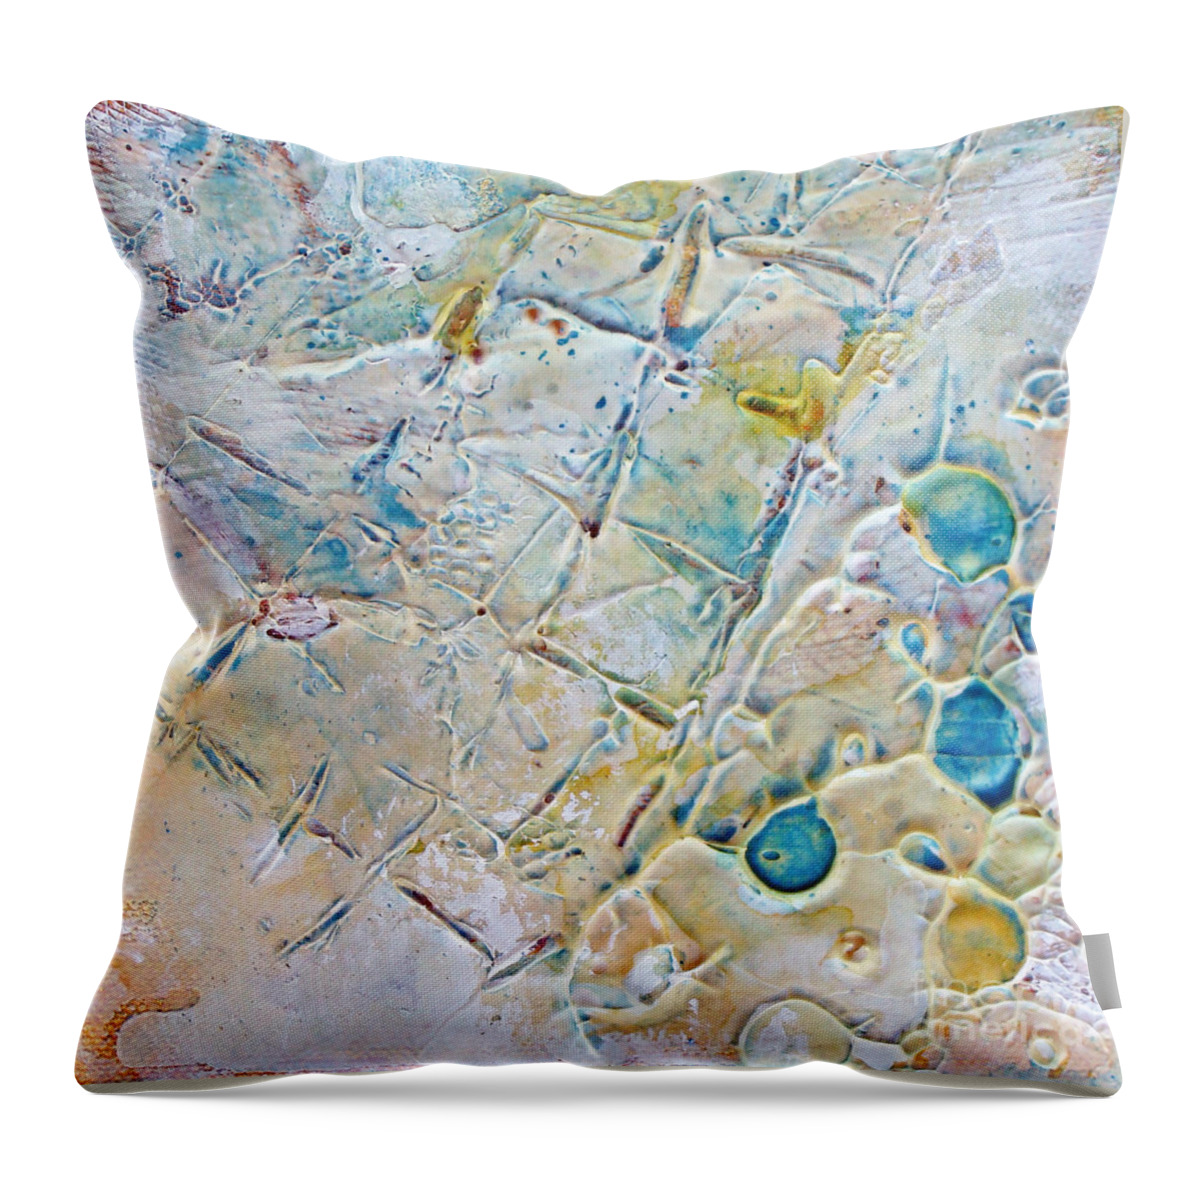 Texture Throw Pillow featuring the mixed media Iced Texture I by Phyllis Howard